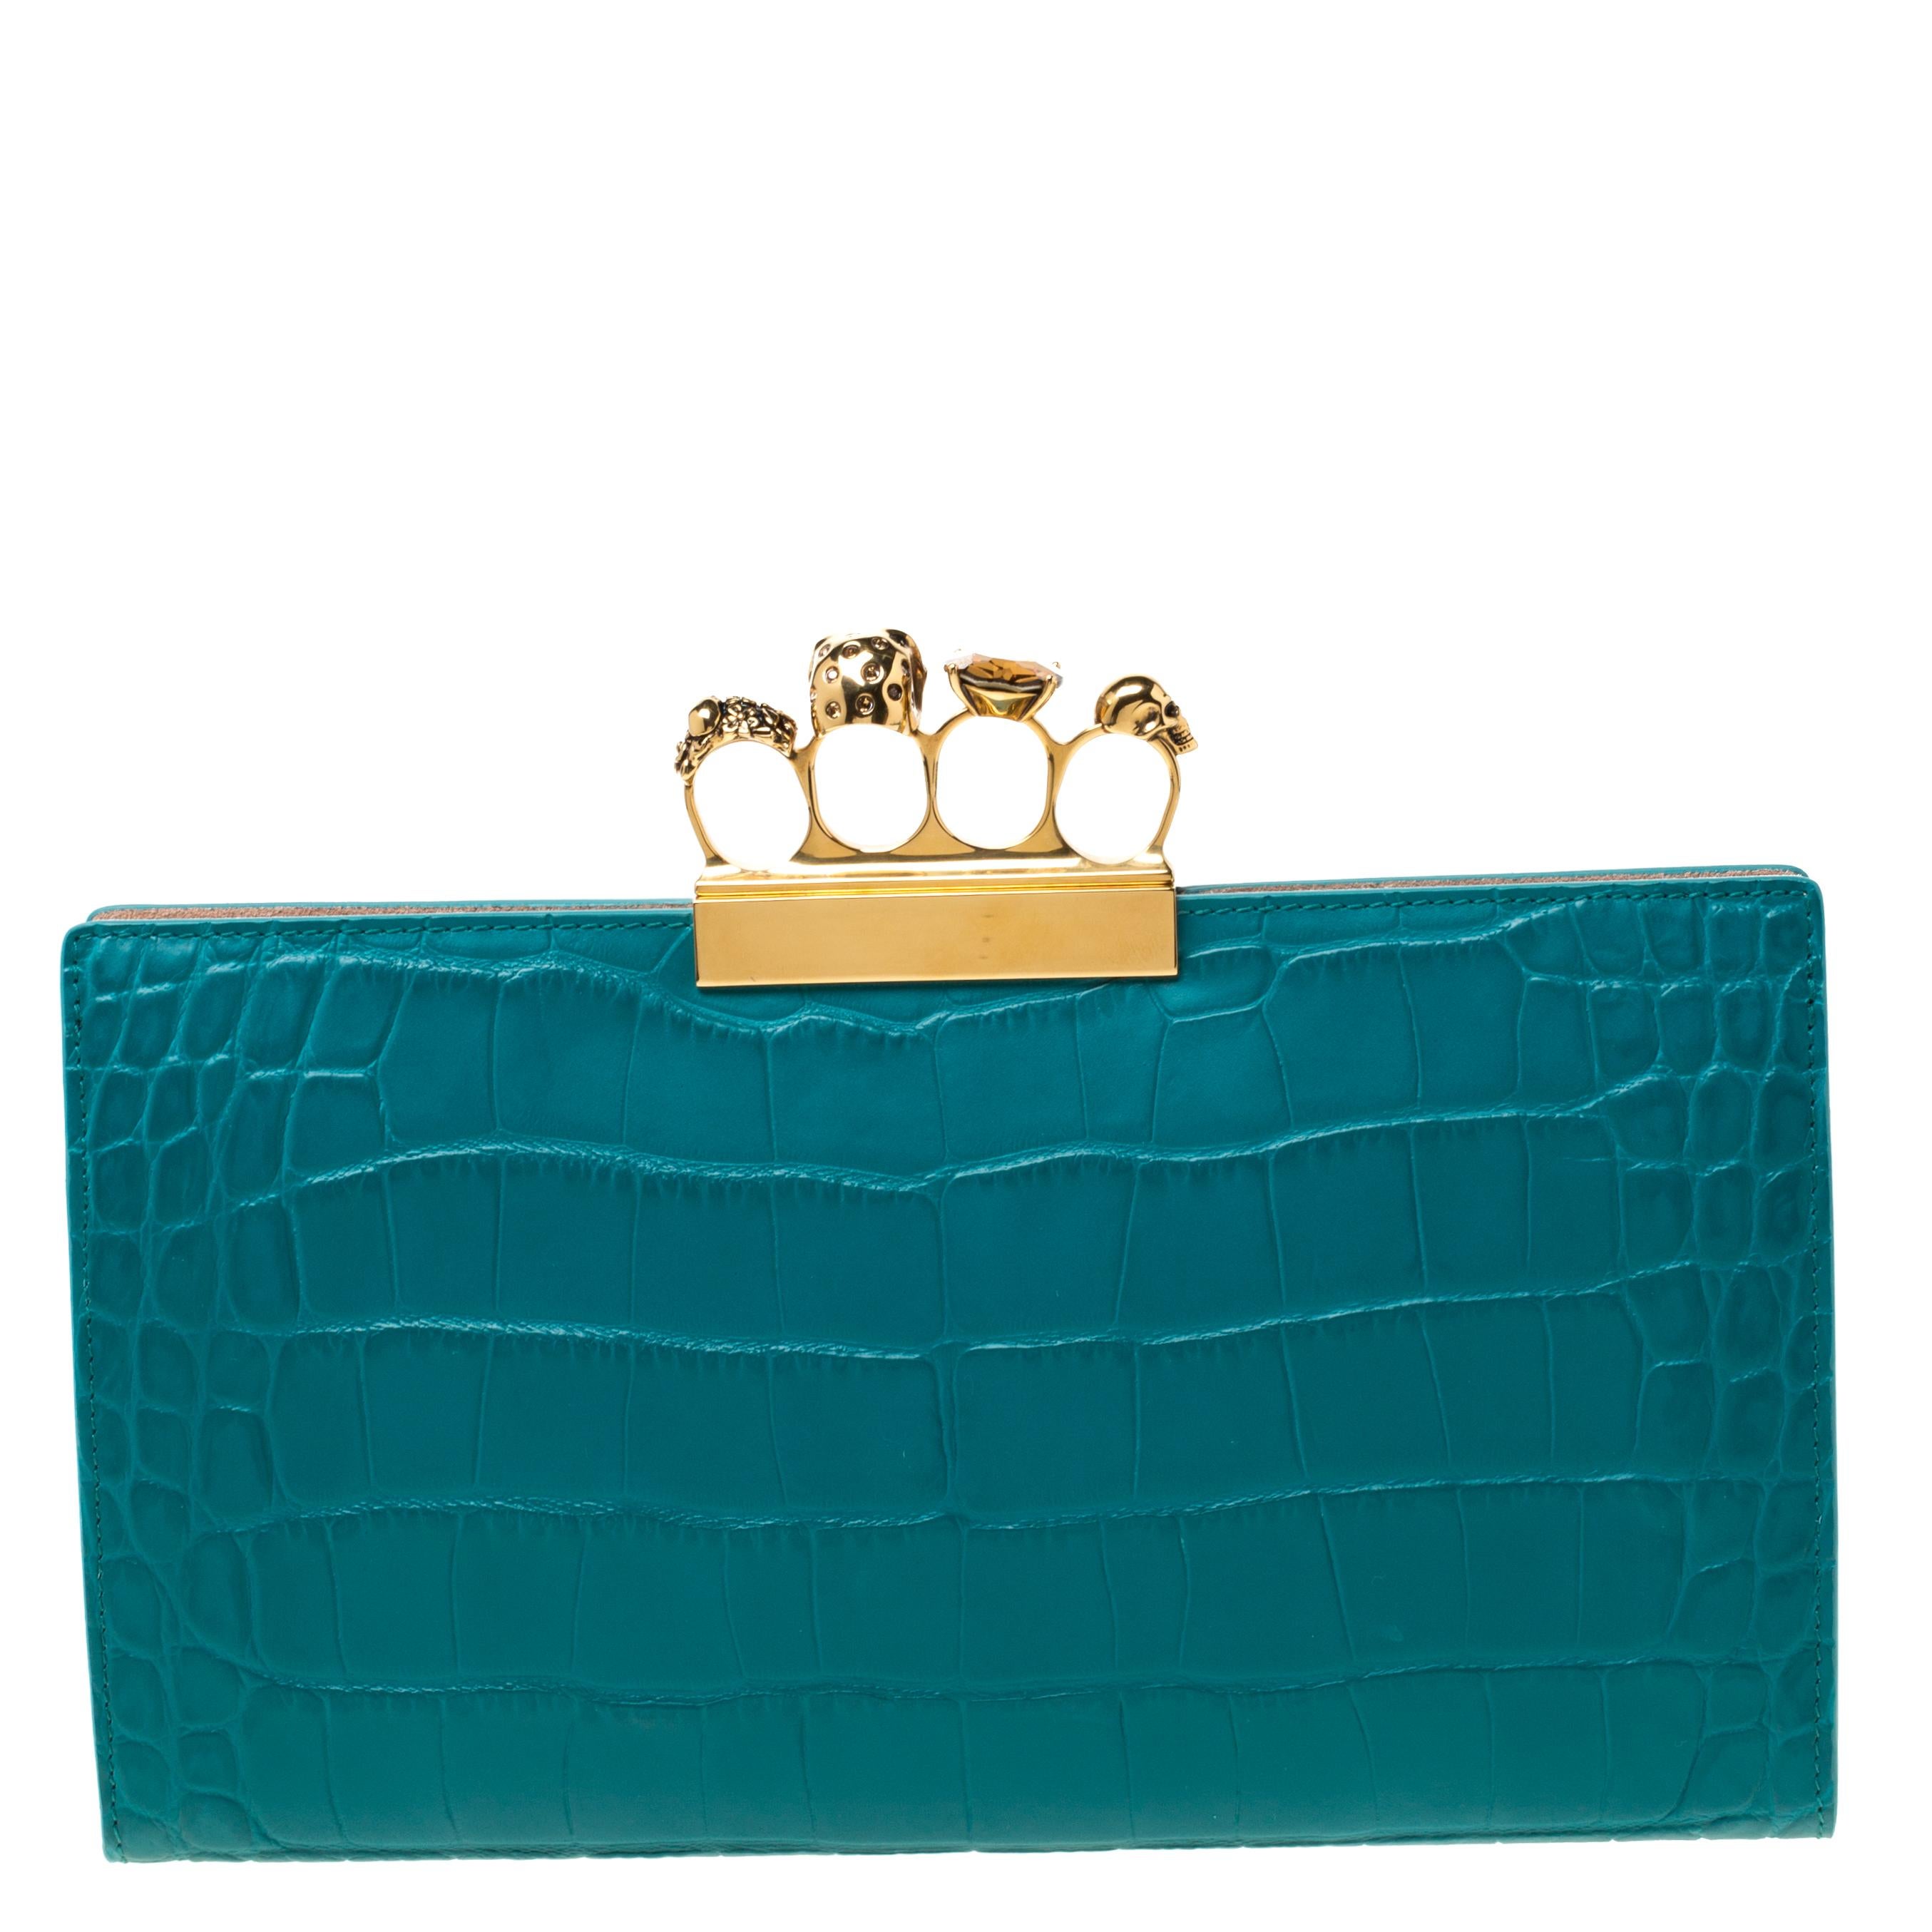 This Knuckle Clutch from Alexander McQueen exudes versatility and luxury. Lined with suede on the insides, it features a green croc-embossed leather exterior. This piece is complete with the brand's iconic skull knuckle clasp on the top. Flaunt this